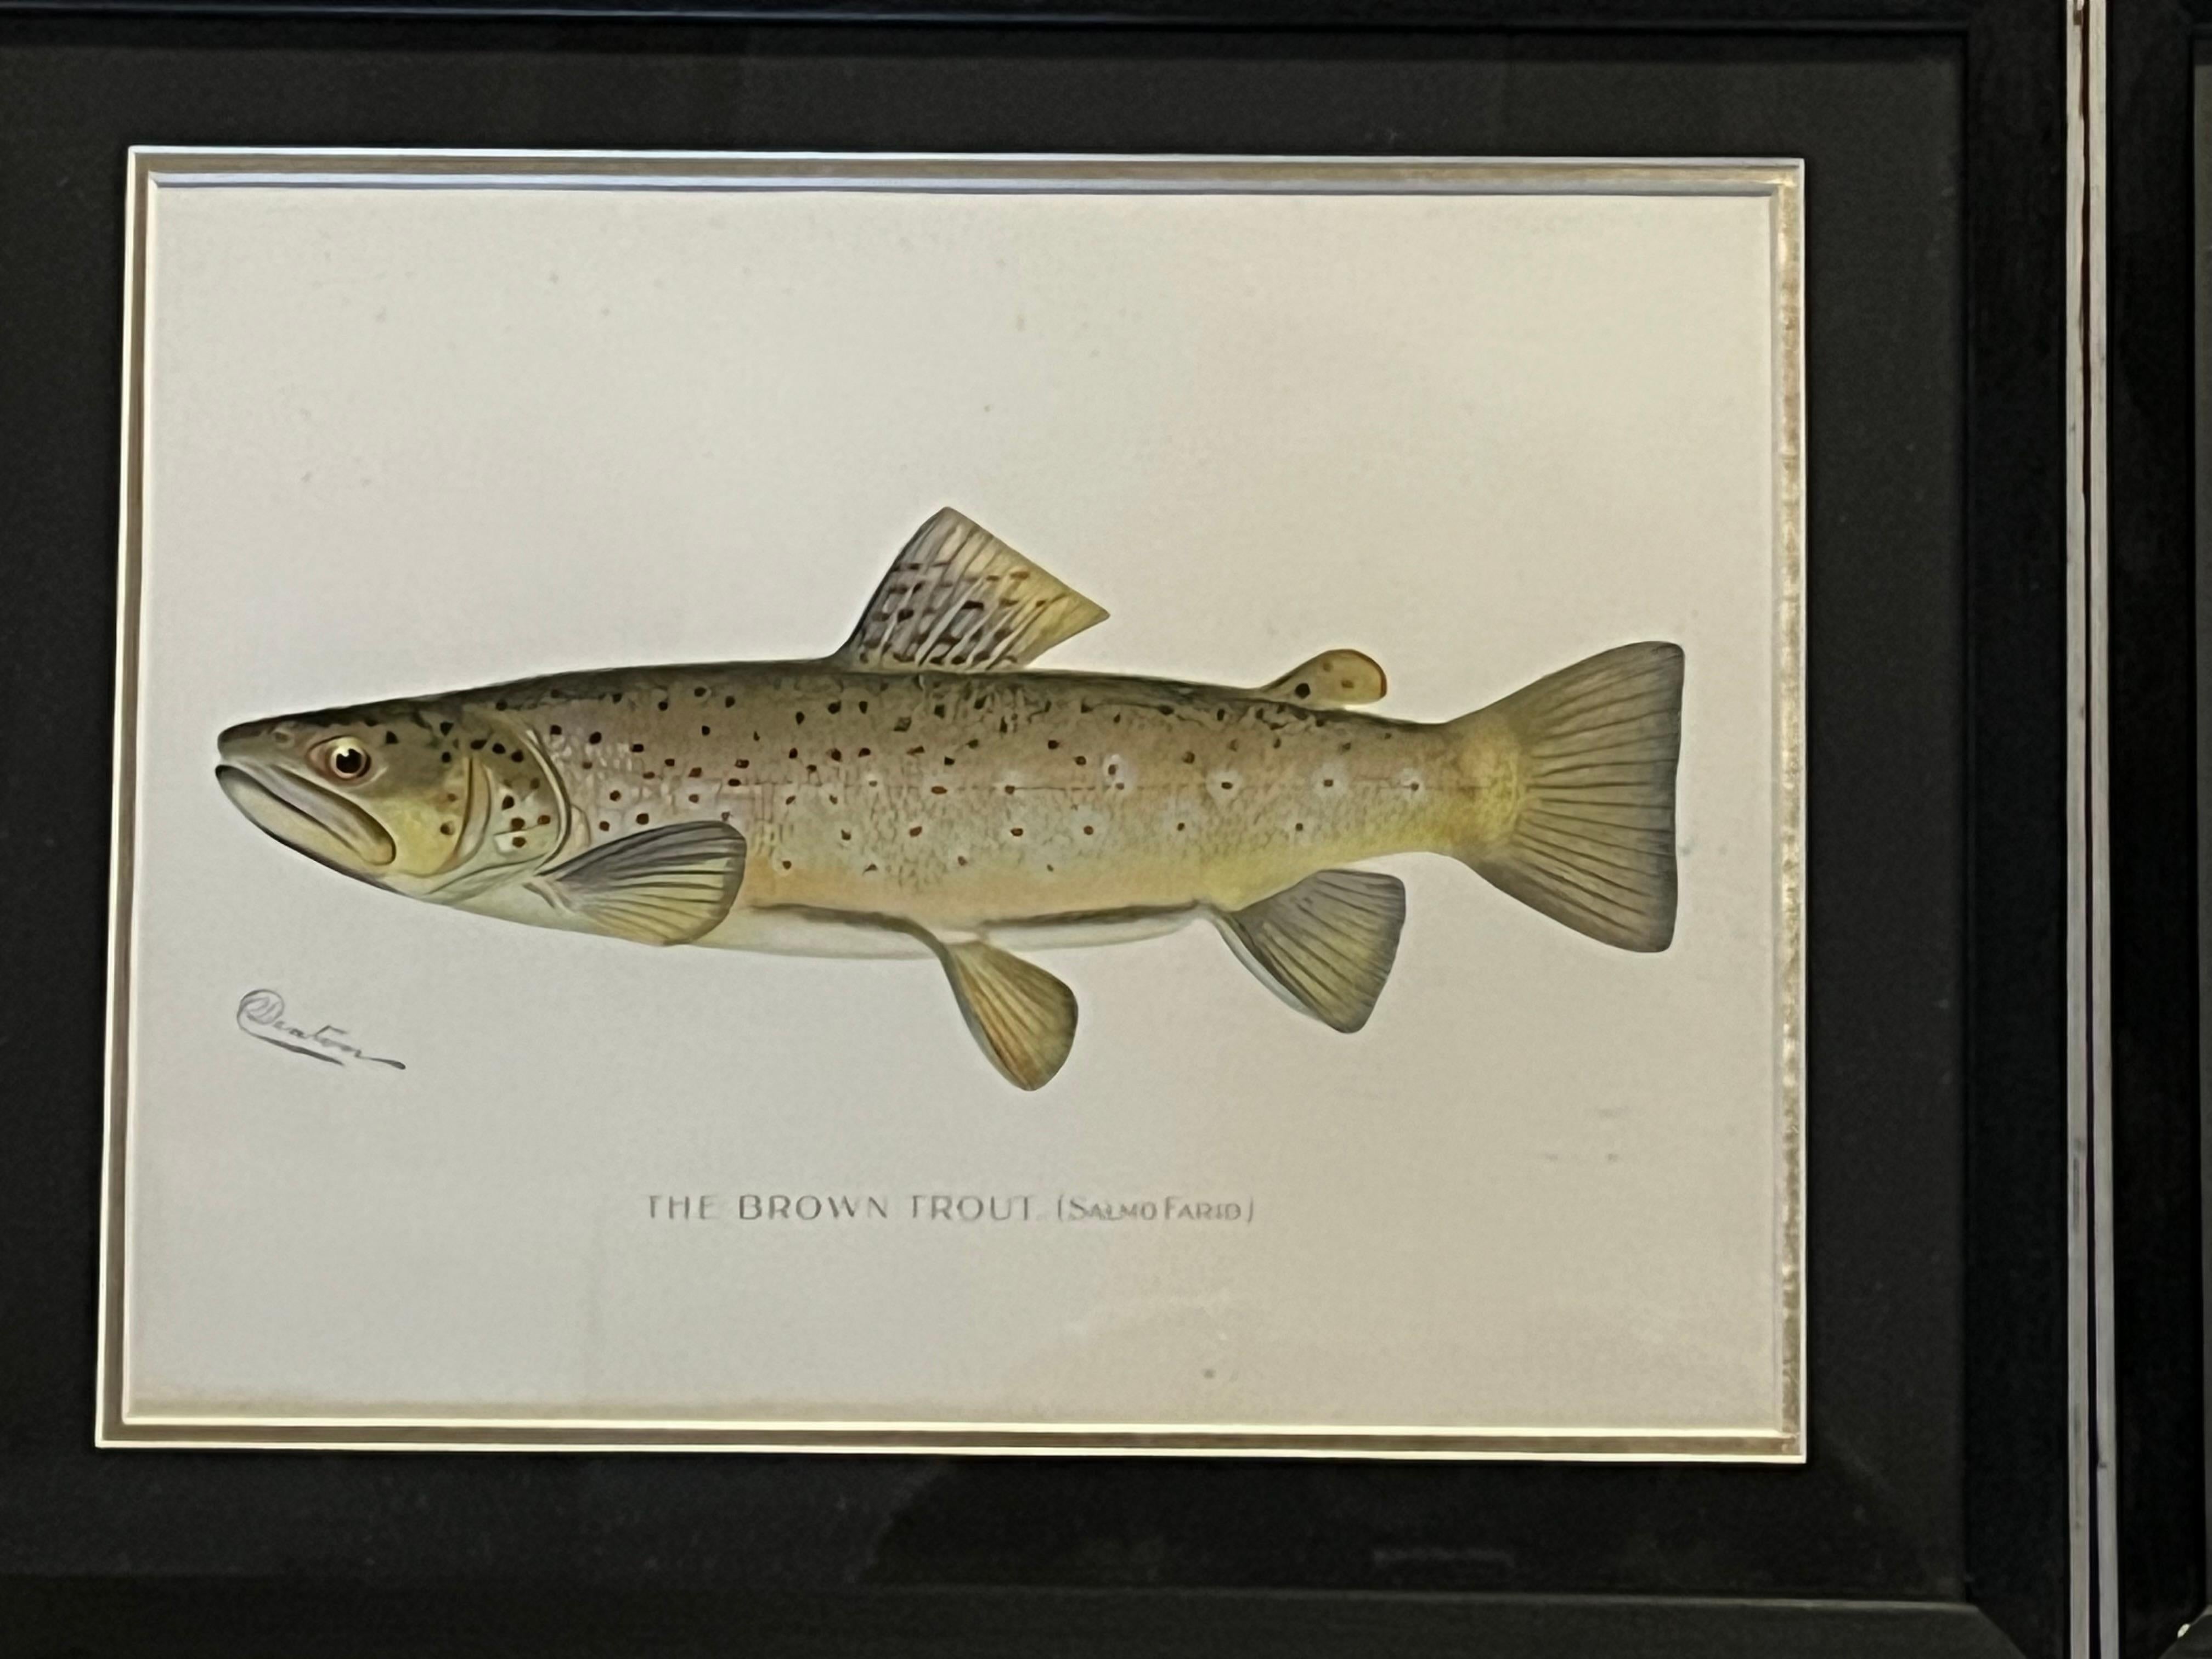 A set of 4 original lithographs of lake fish by Sherman Foote Denton, circa 1895-1900. Matted and framed under glass. Each is signed Denton in the plate, lower left. 